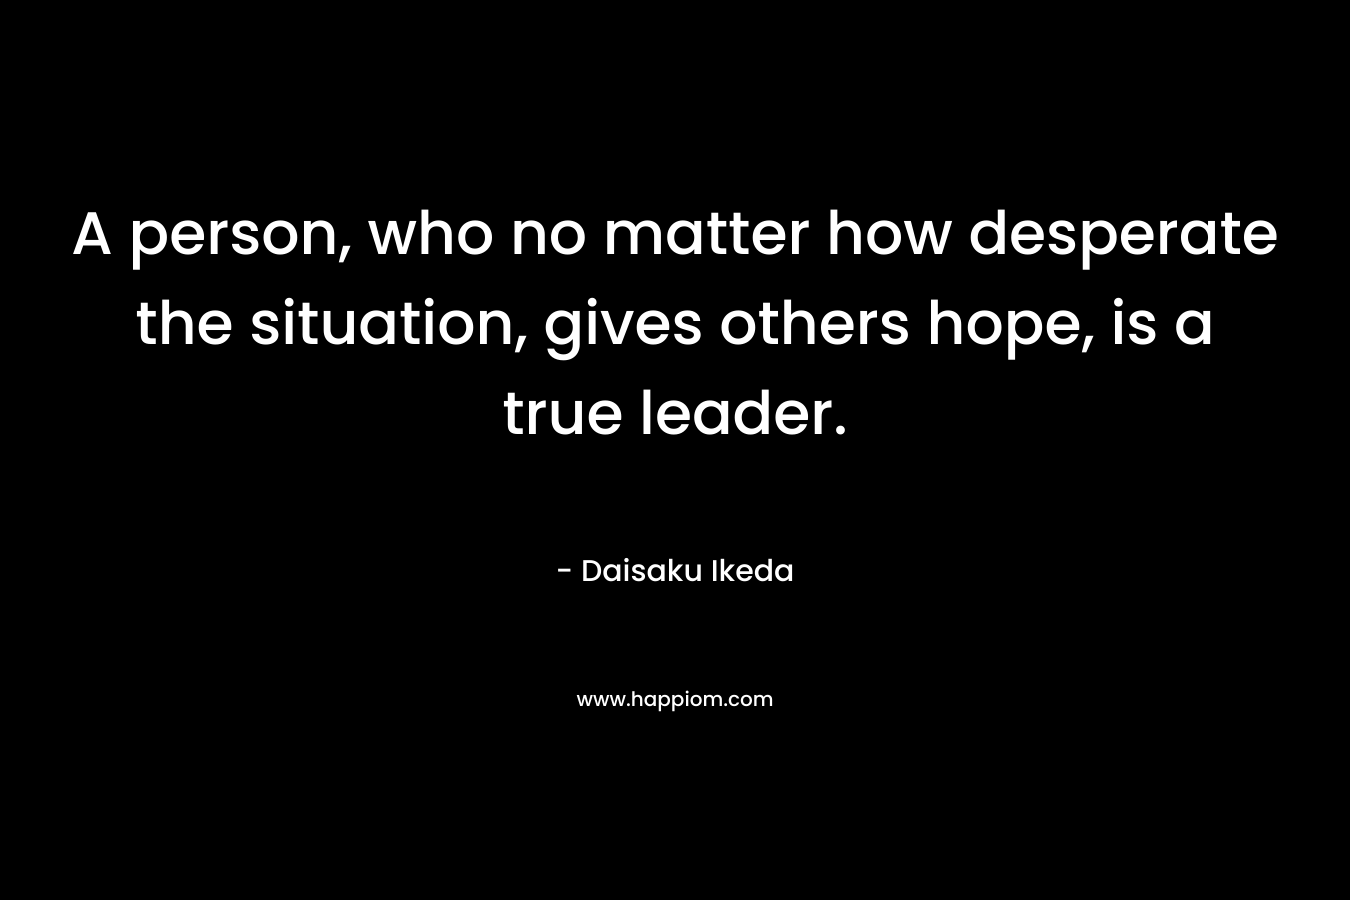 A person, who no matter how desperate the situation, gives others hope, is a true leader. – Daisaku Ikeda